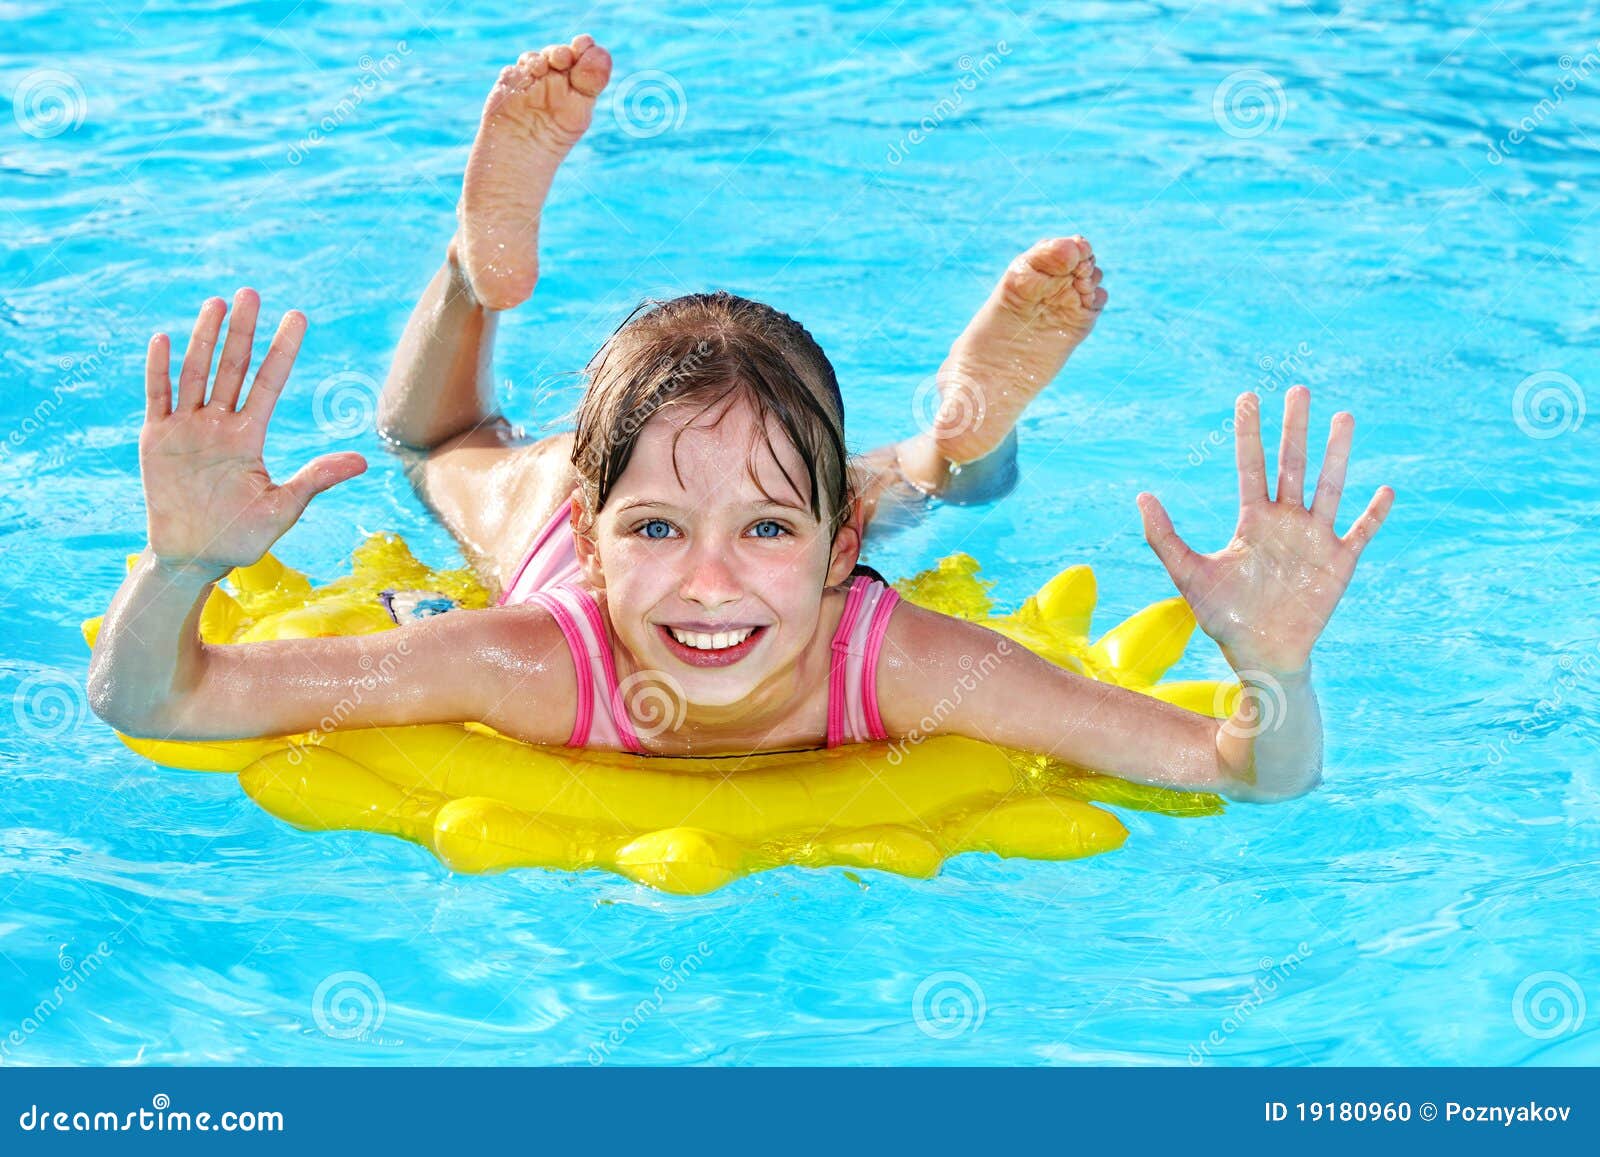 Child on inflatable ring . stock photo. Image of float - 19180960